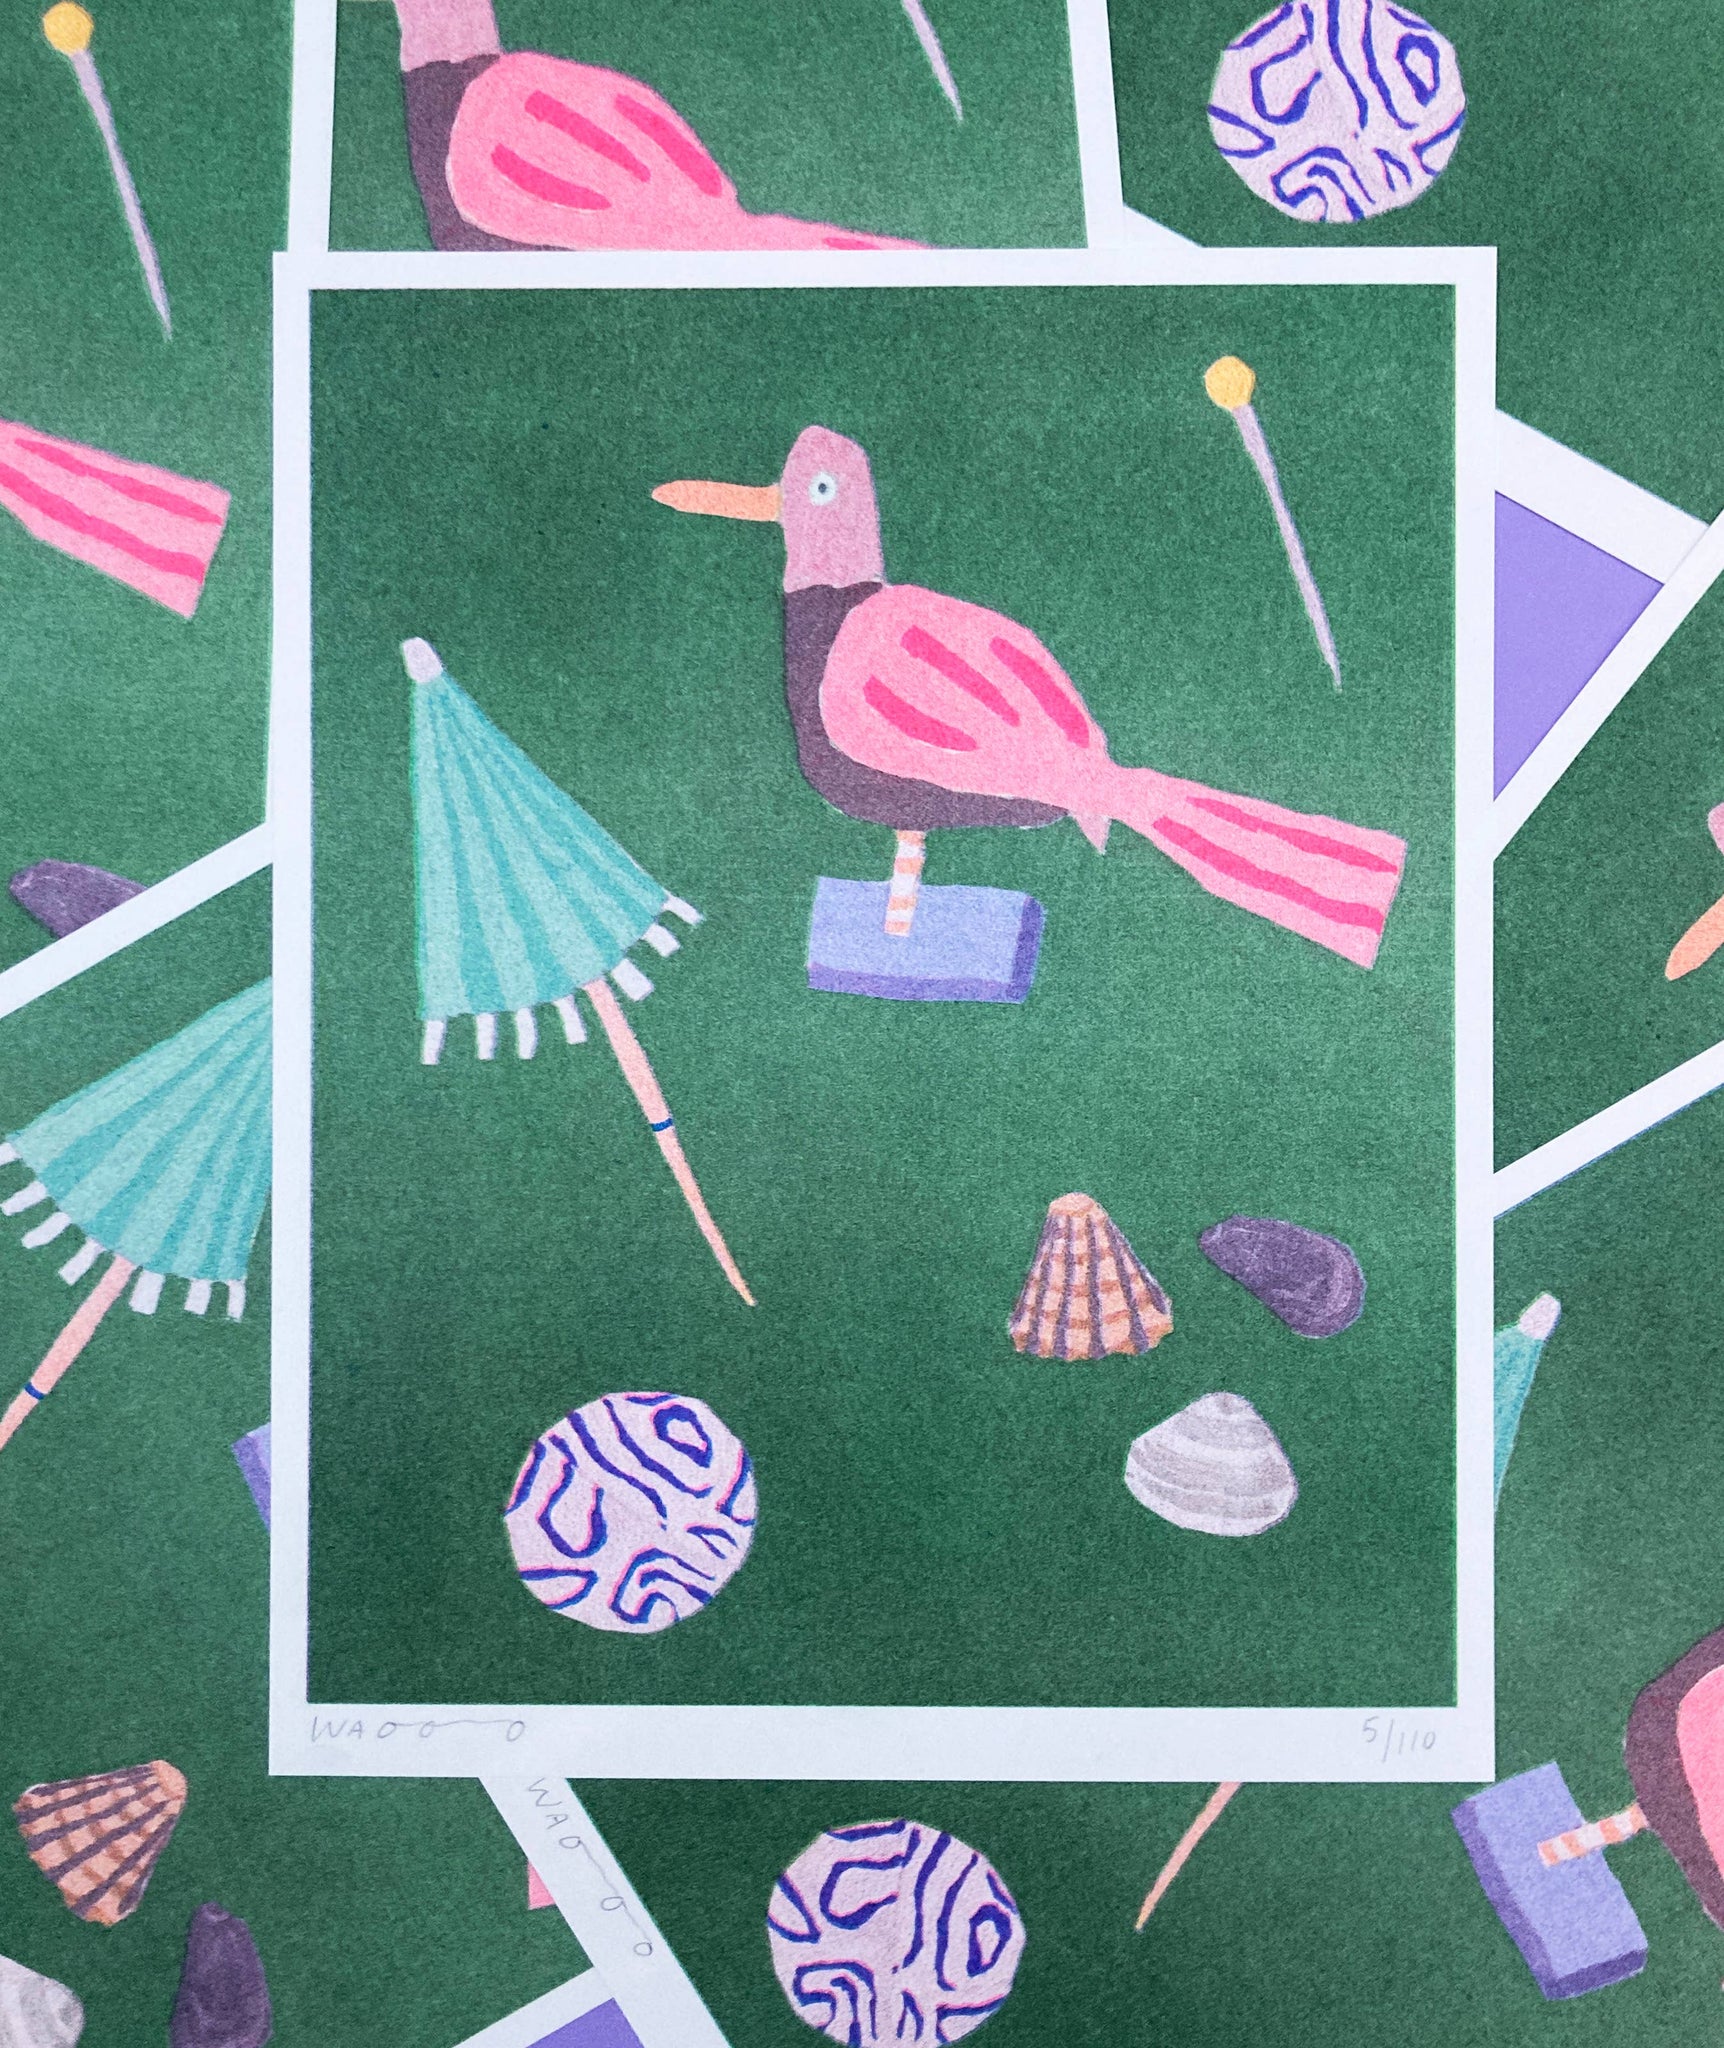 We Are Out of Office - A Risograph Print of a Gouache Painting of a Mini Collection